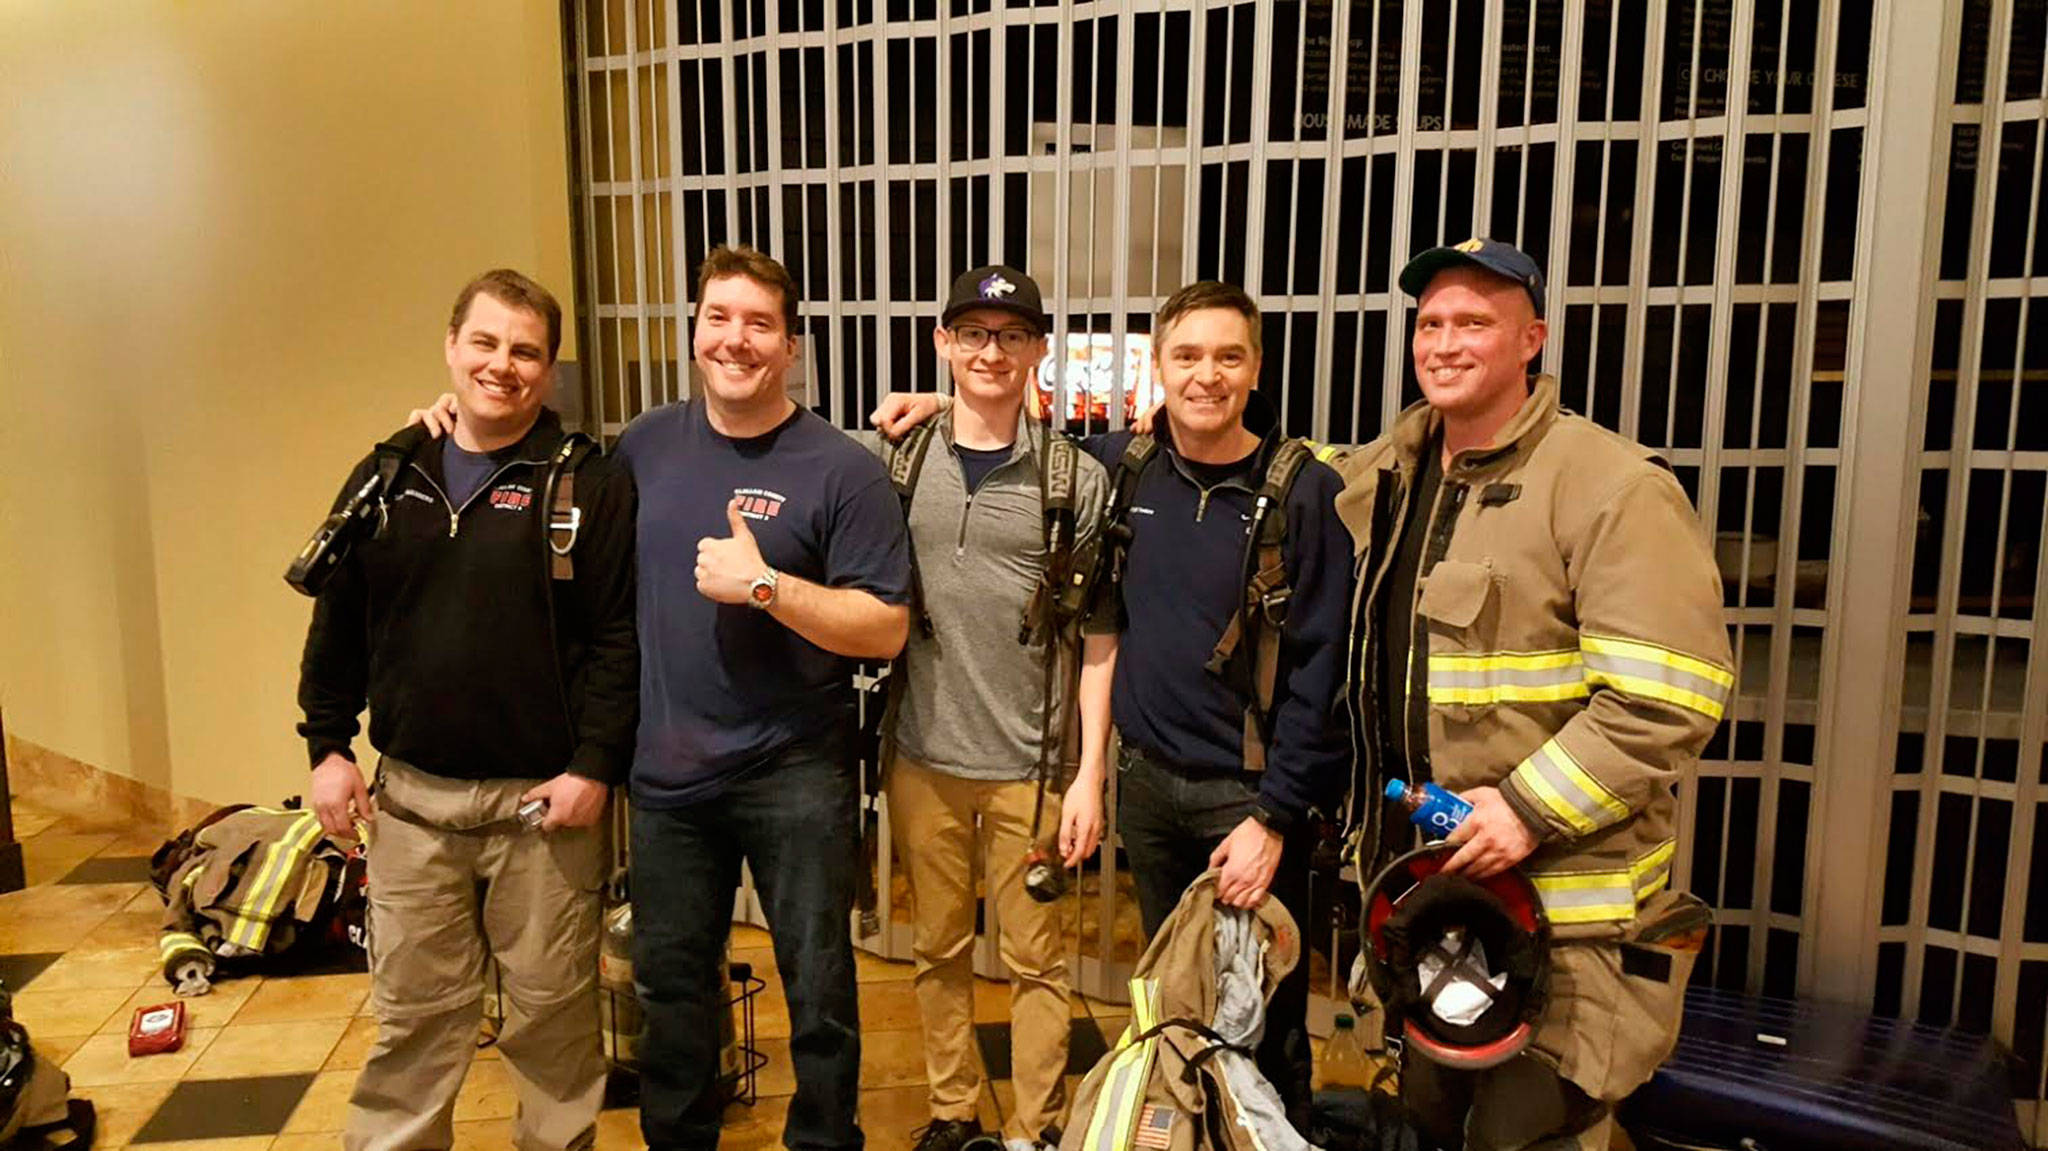 Clallam County Fire District 3 Capt. Bryan Swanberg, left, firefighter/paramedic Neil Borggard, Conner Forderer, firefighter/EMT Lee Forderer and Lt. Chad Cate participated in the annual Scott Firefighter Stairclimb fundraiser that raises money for blood-cancer research and patient services. Submitted photo